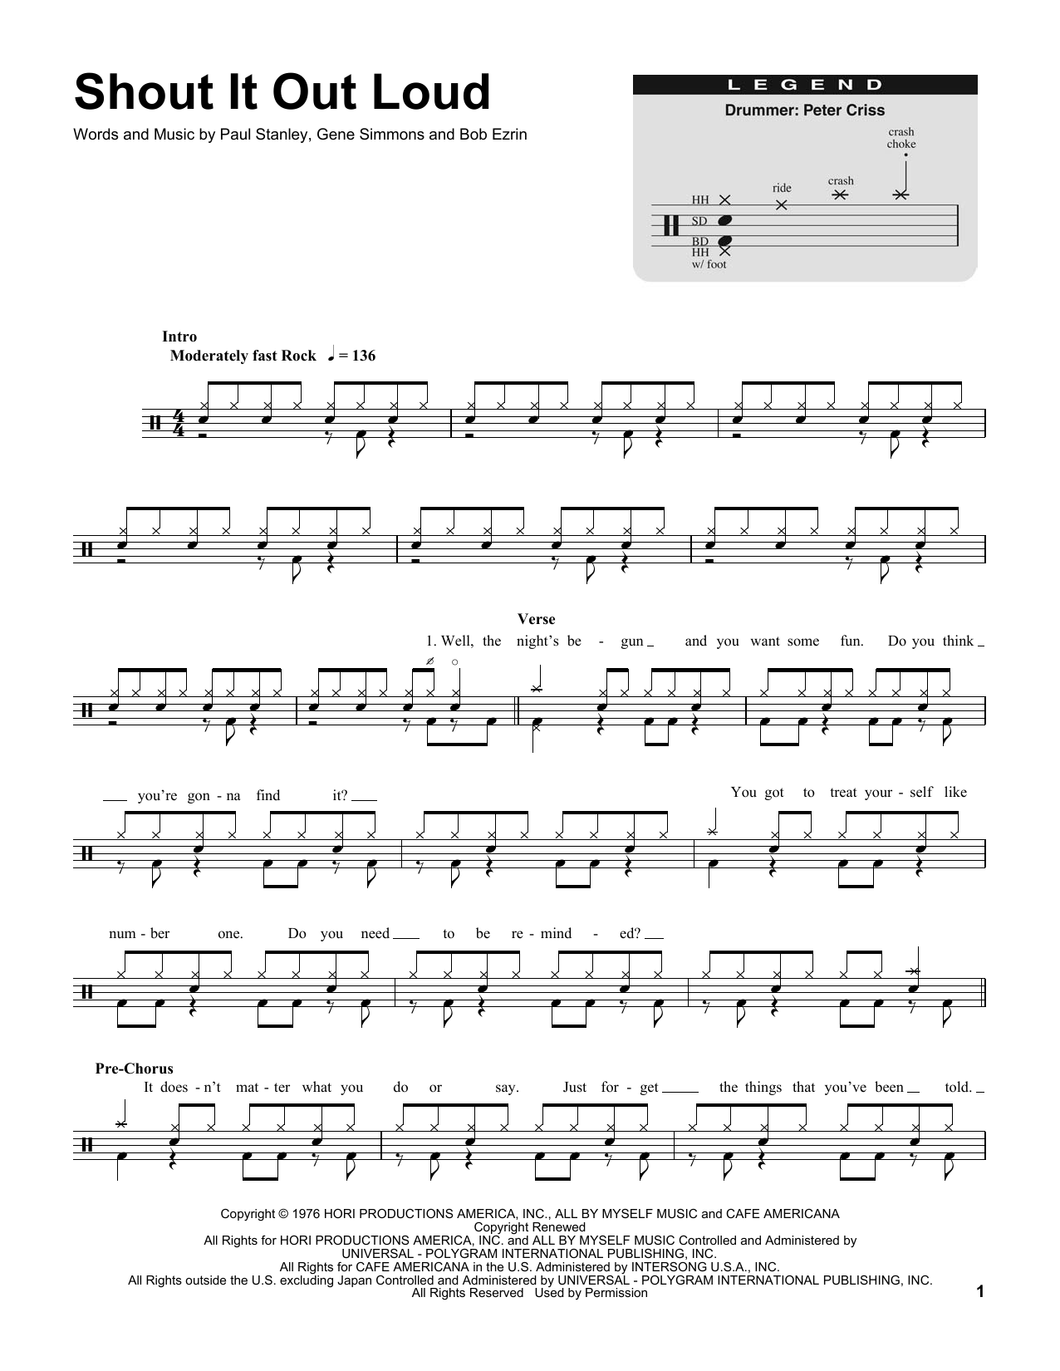 Shout It Out Loud - Kiss - Full Drum Transcription / Drum Sheet Music - SheetMusicDirect DT